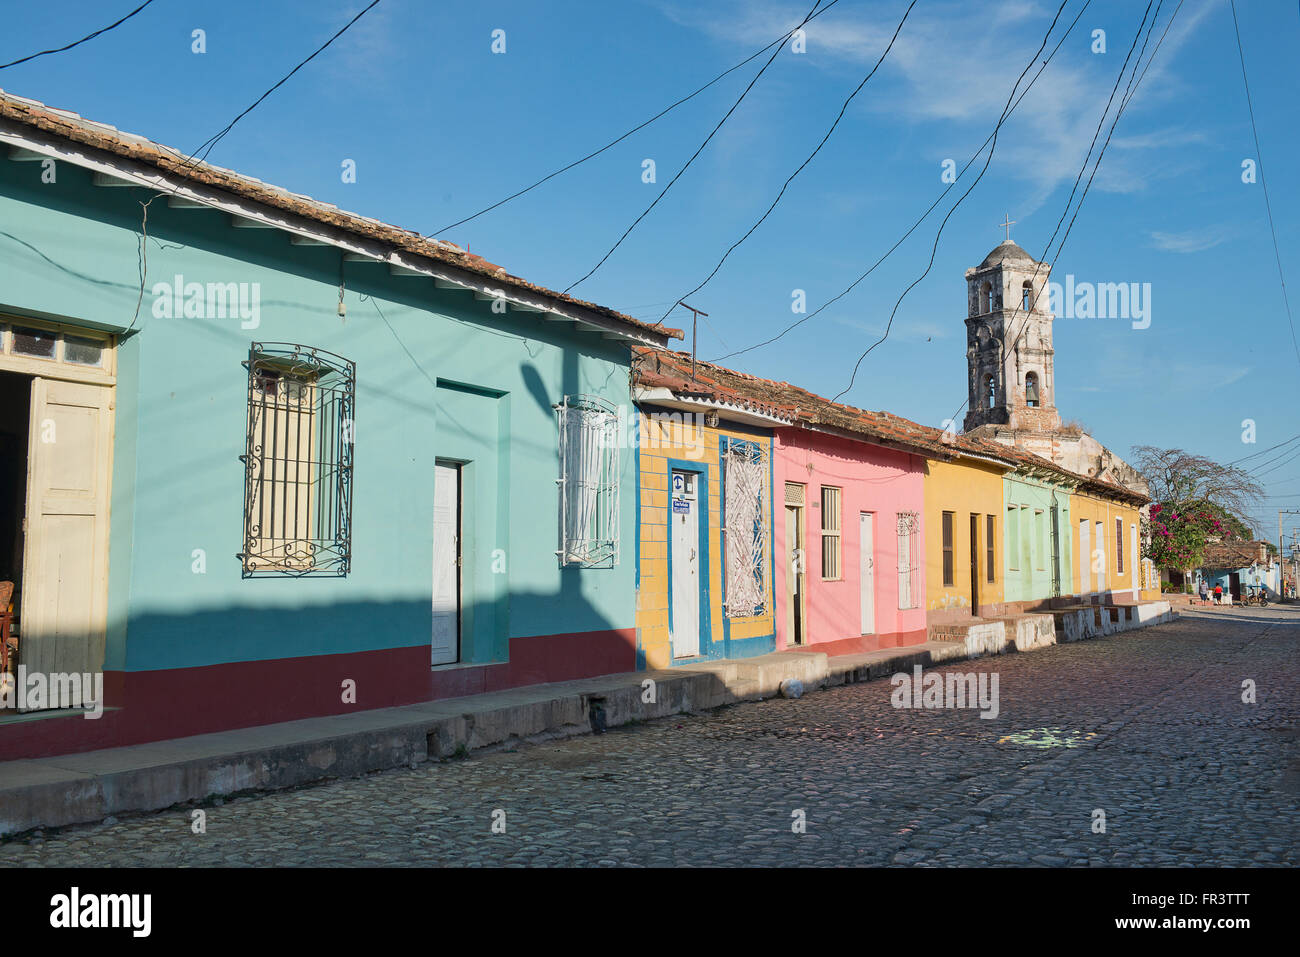 Electricity cables connect colorful houses on a street in the old colonial town of Trinidad, Cuba. Stock Photo